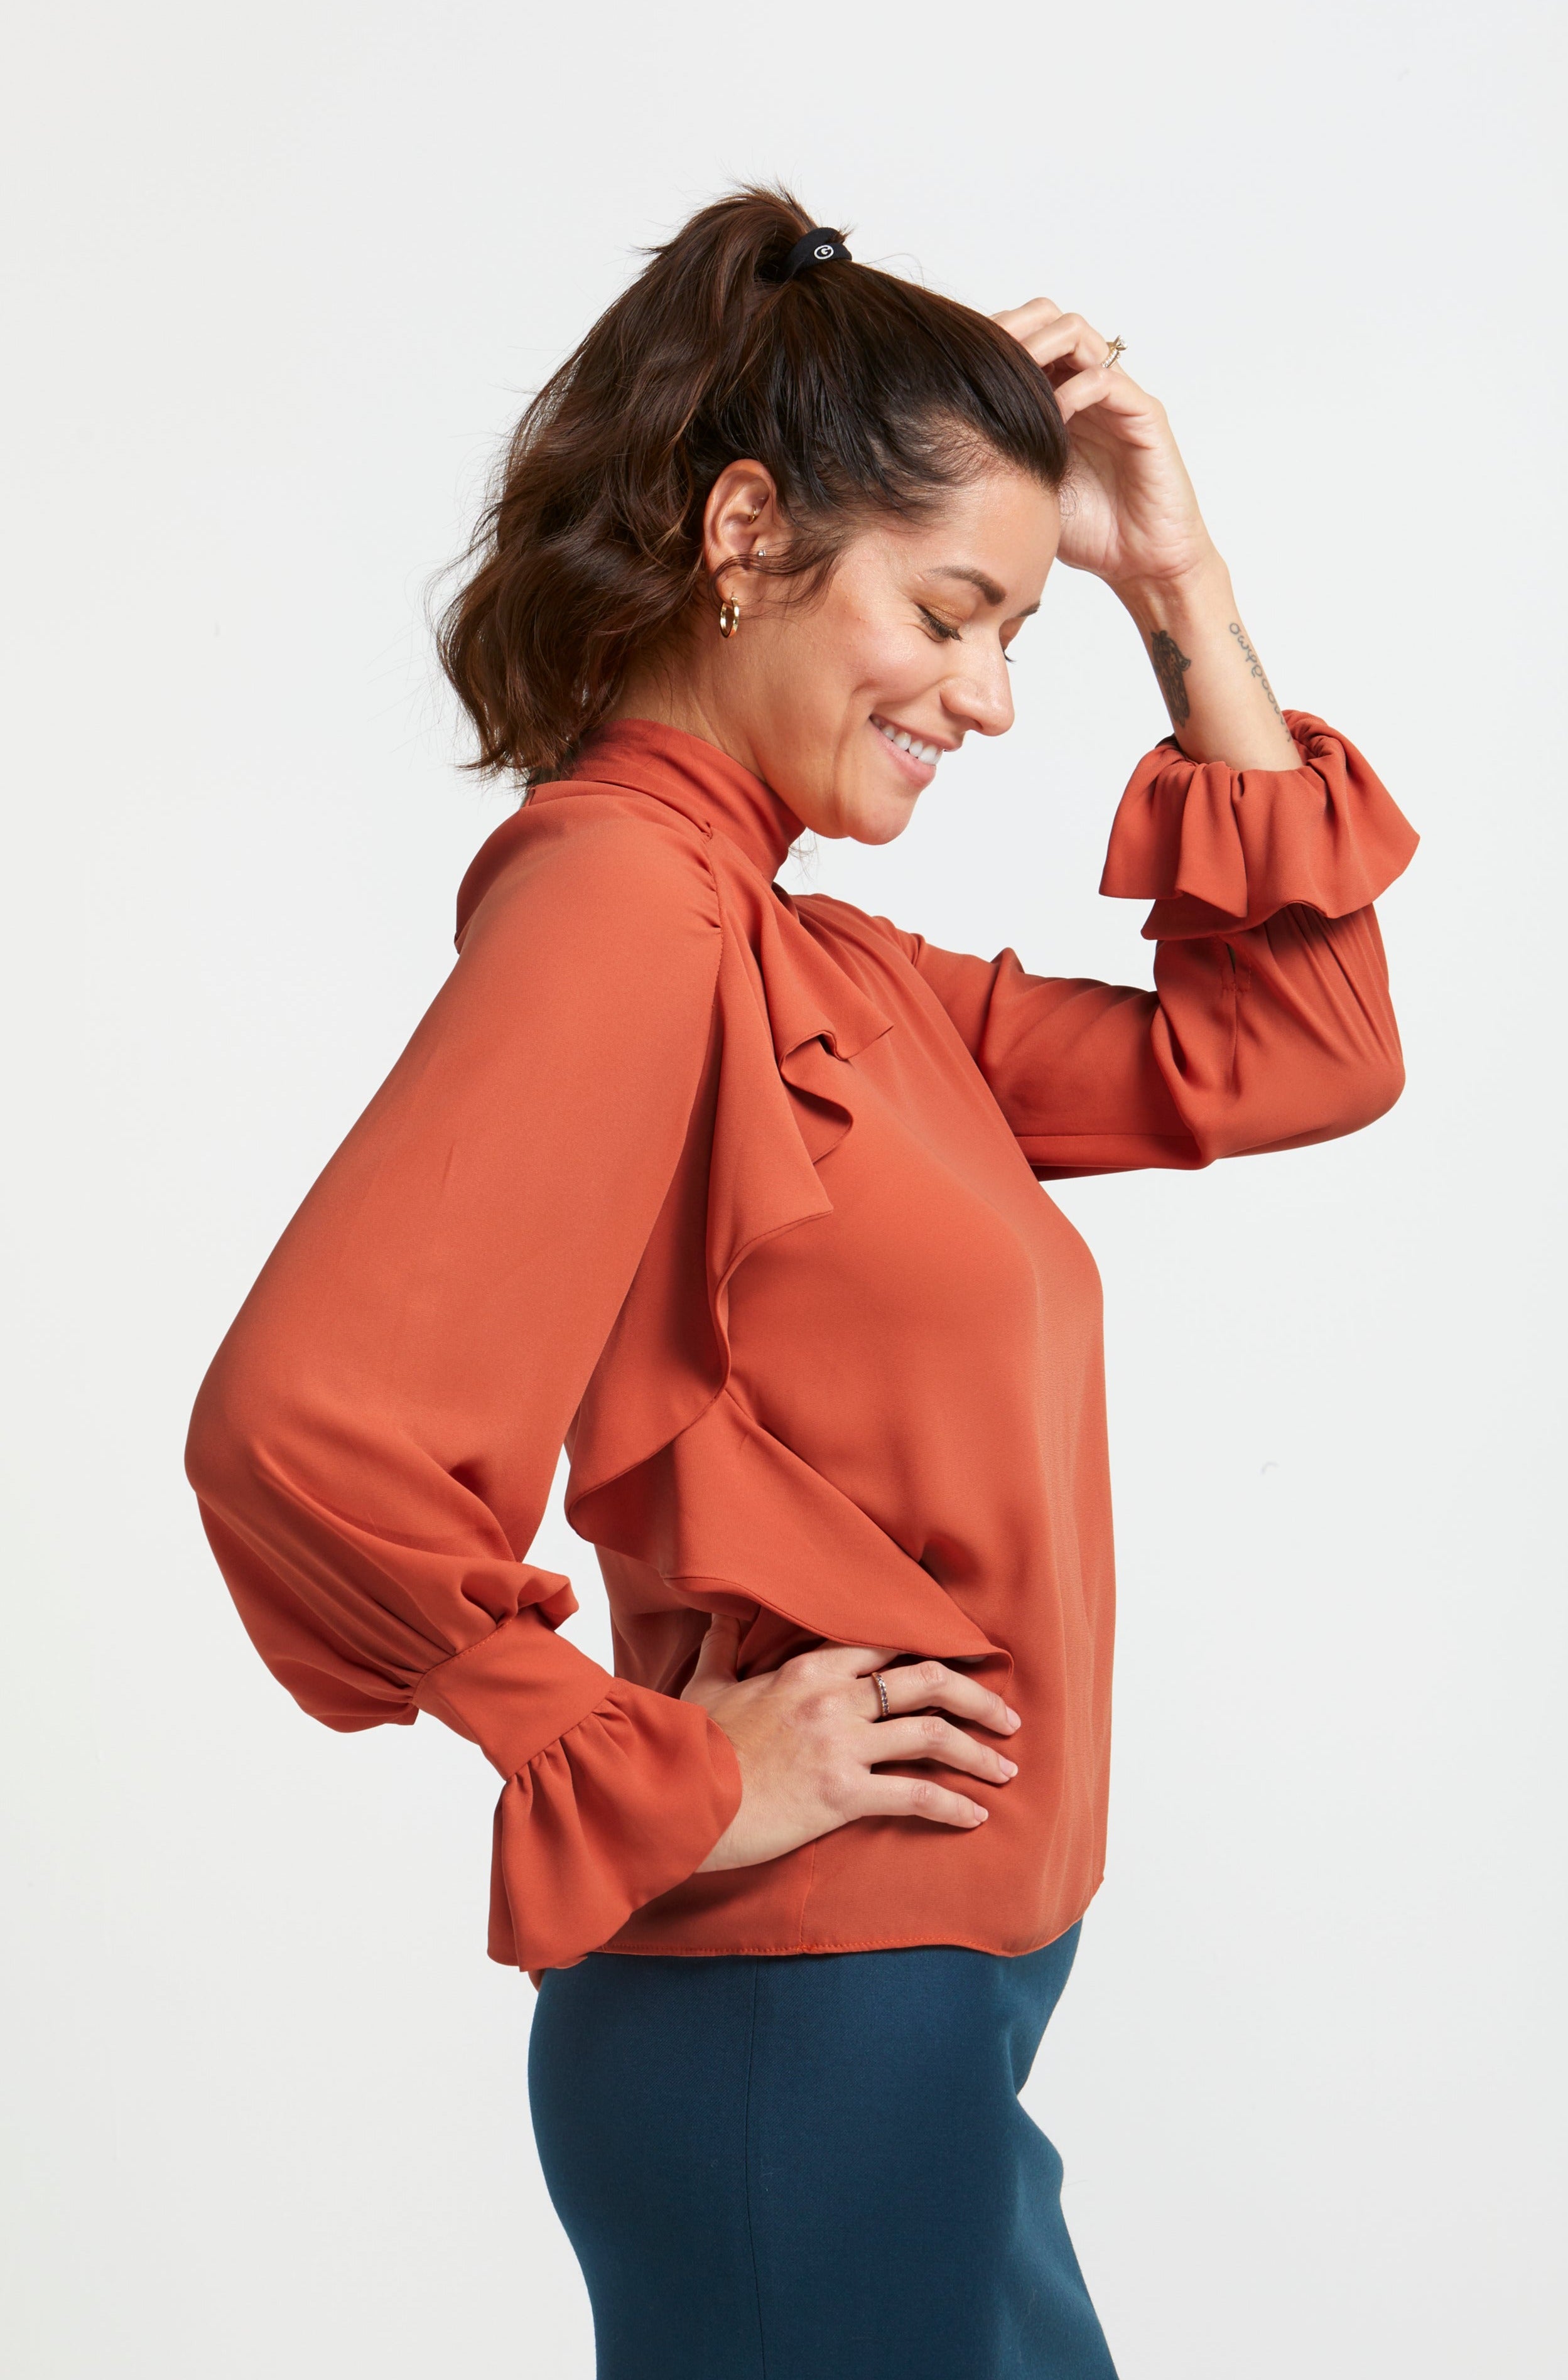 Sara Sabella Anna Orange Soft Ruffled Lightweight Blouse Side View- Made in Italy Women's Clothing